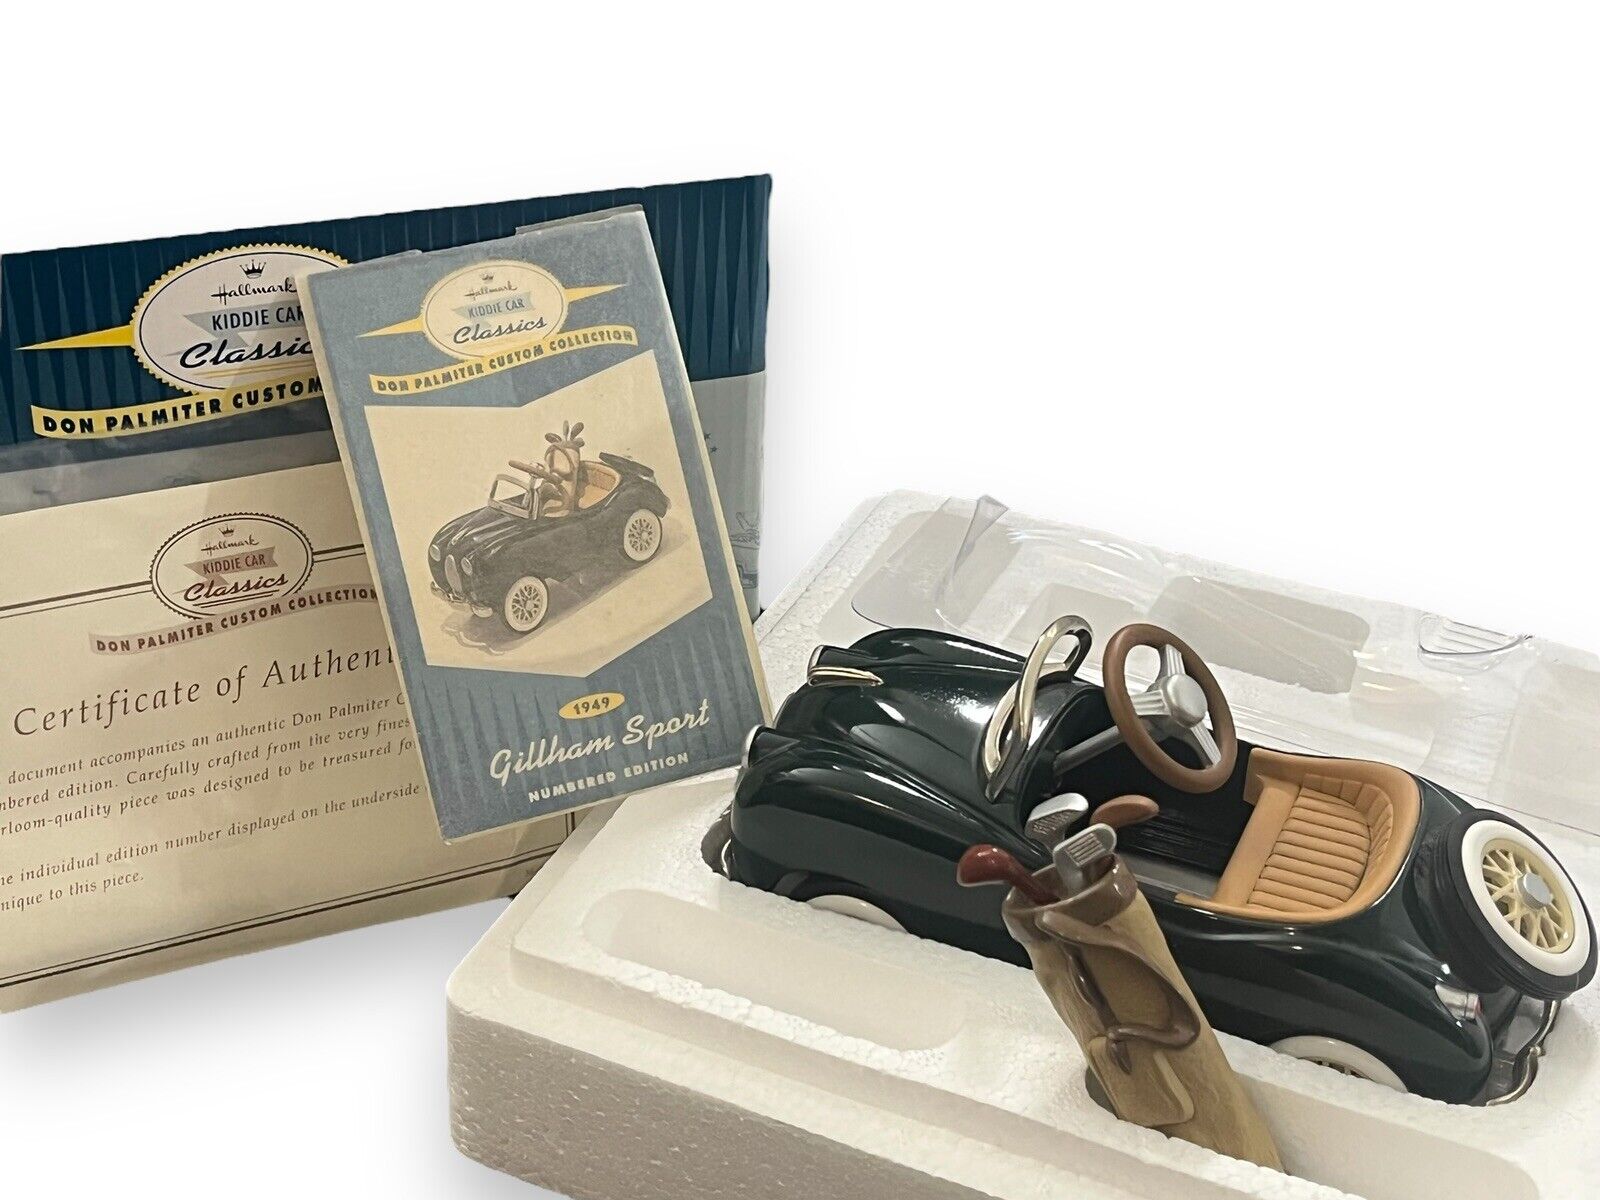 Hallmark Kiddie Car Classic 1949 Gillham Don Palmiter Pedal Car Numbered LE IOB